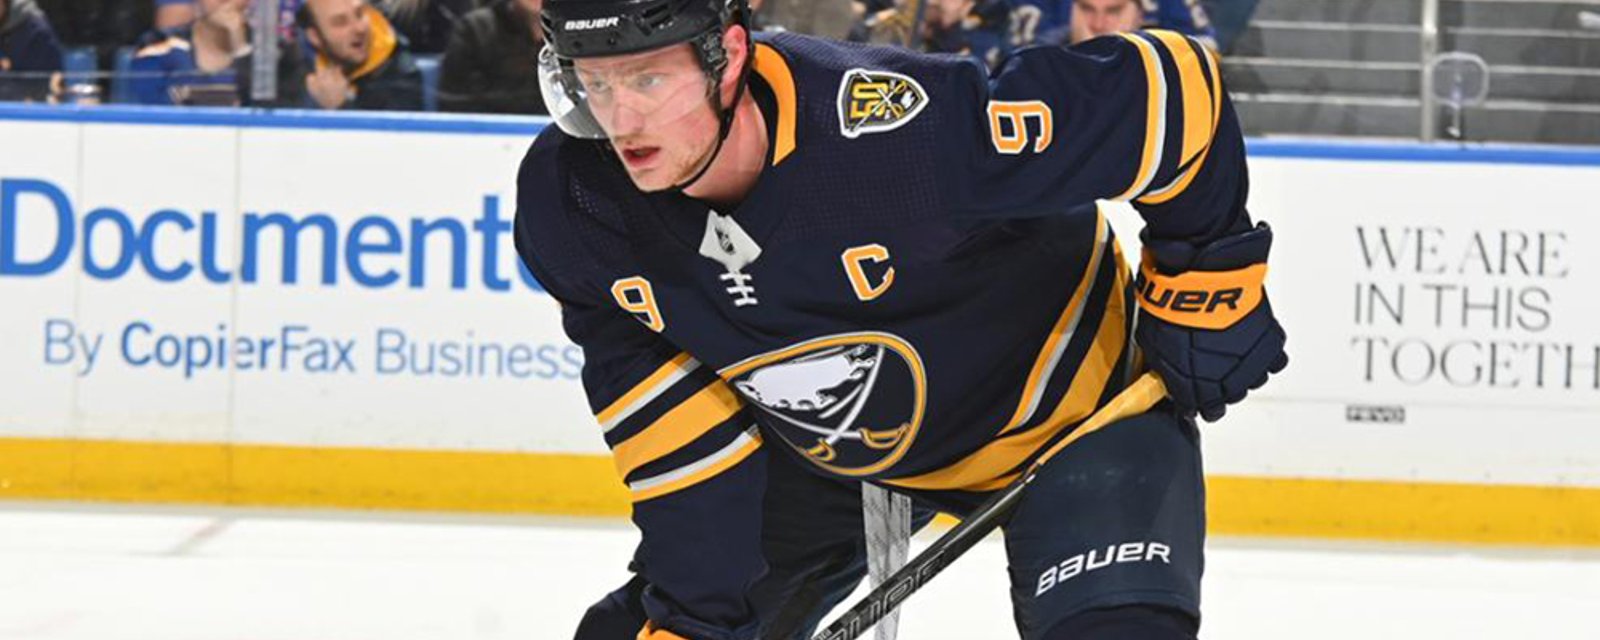 Eichel pulled from lineup moments before game against Flyers